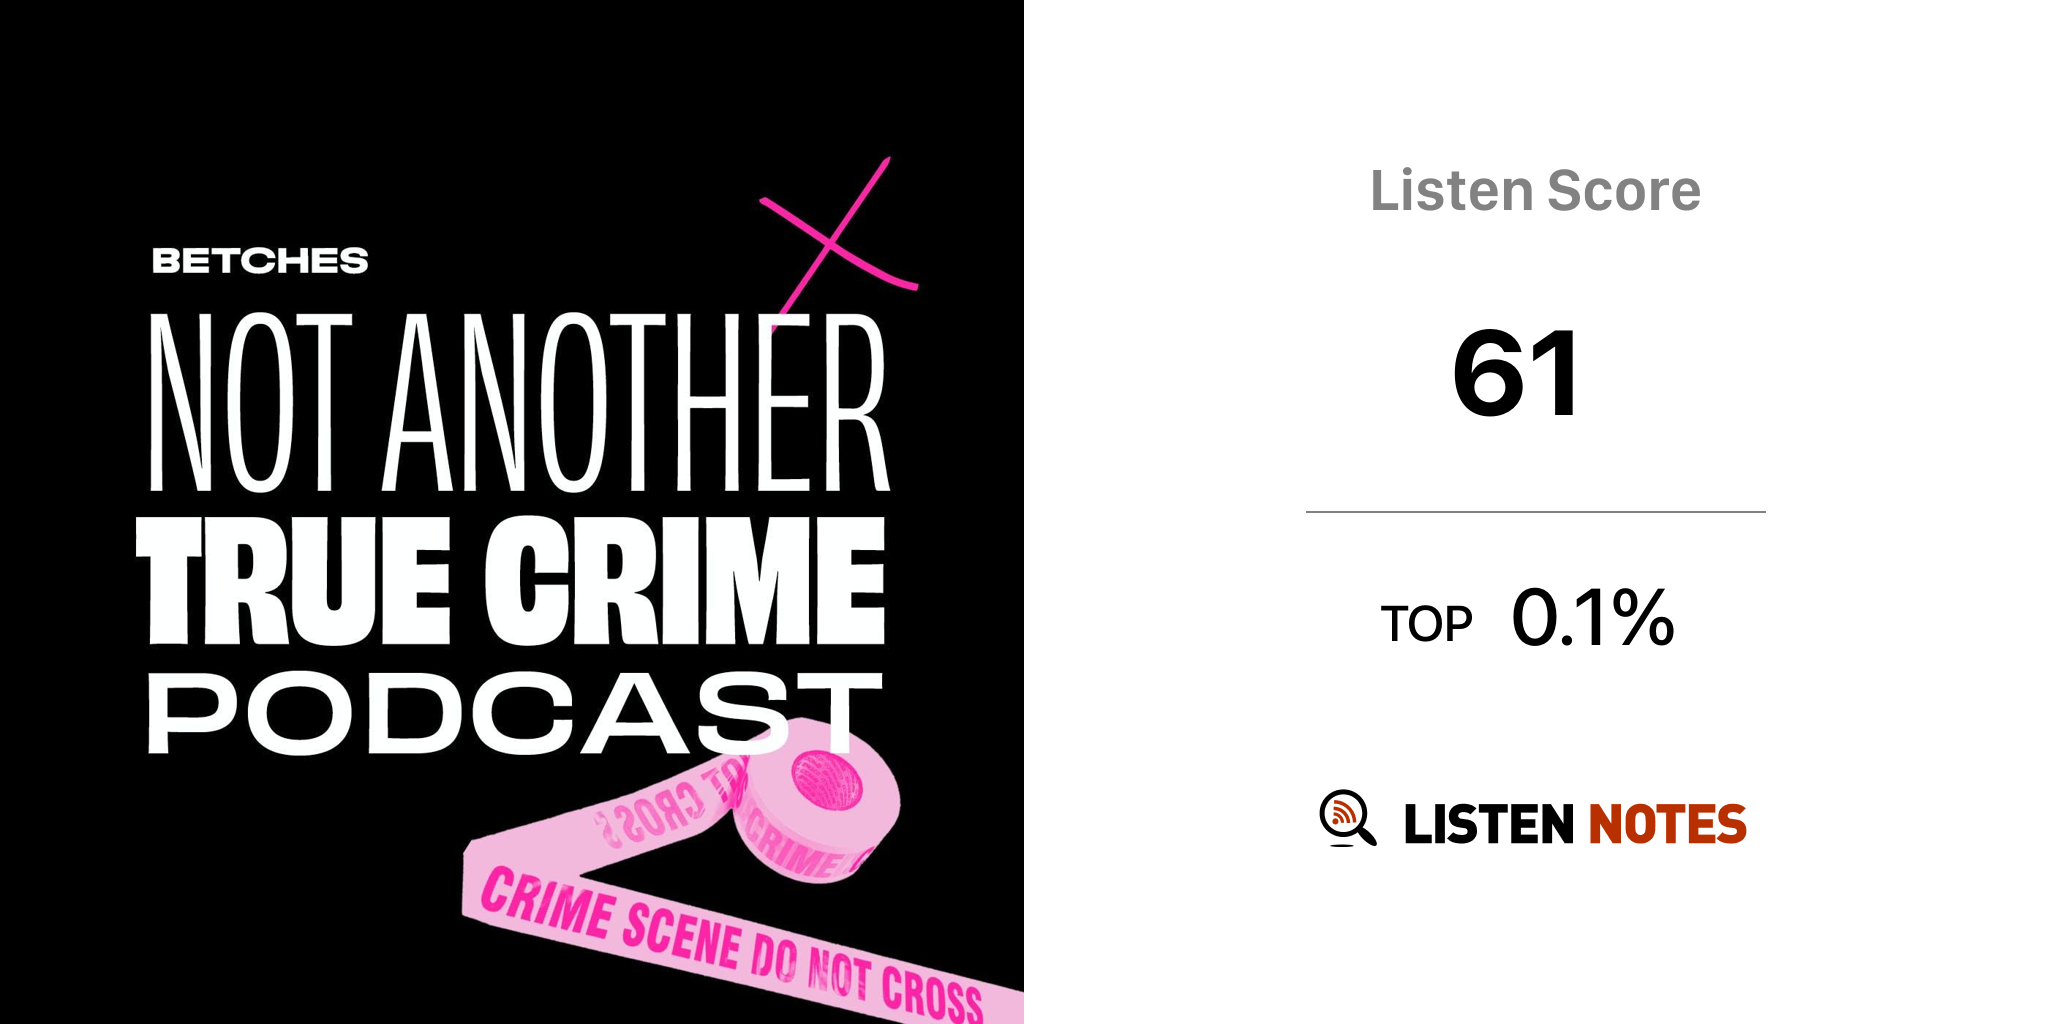 Not Another True Crime Podcast - Betches Media | Listen Notes